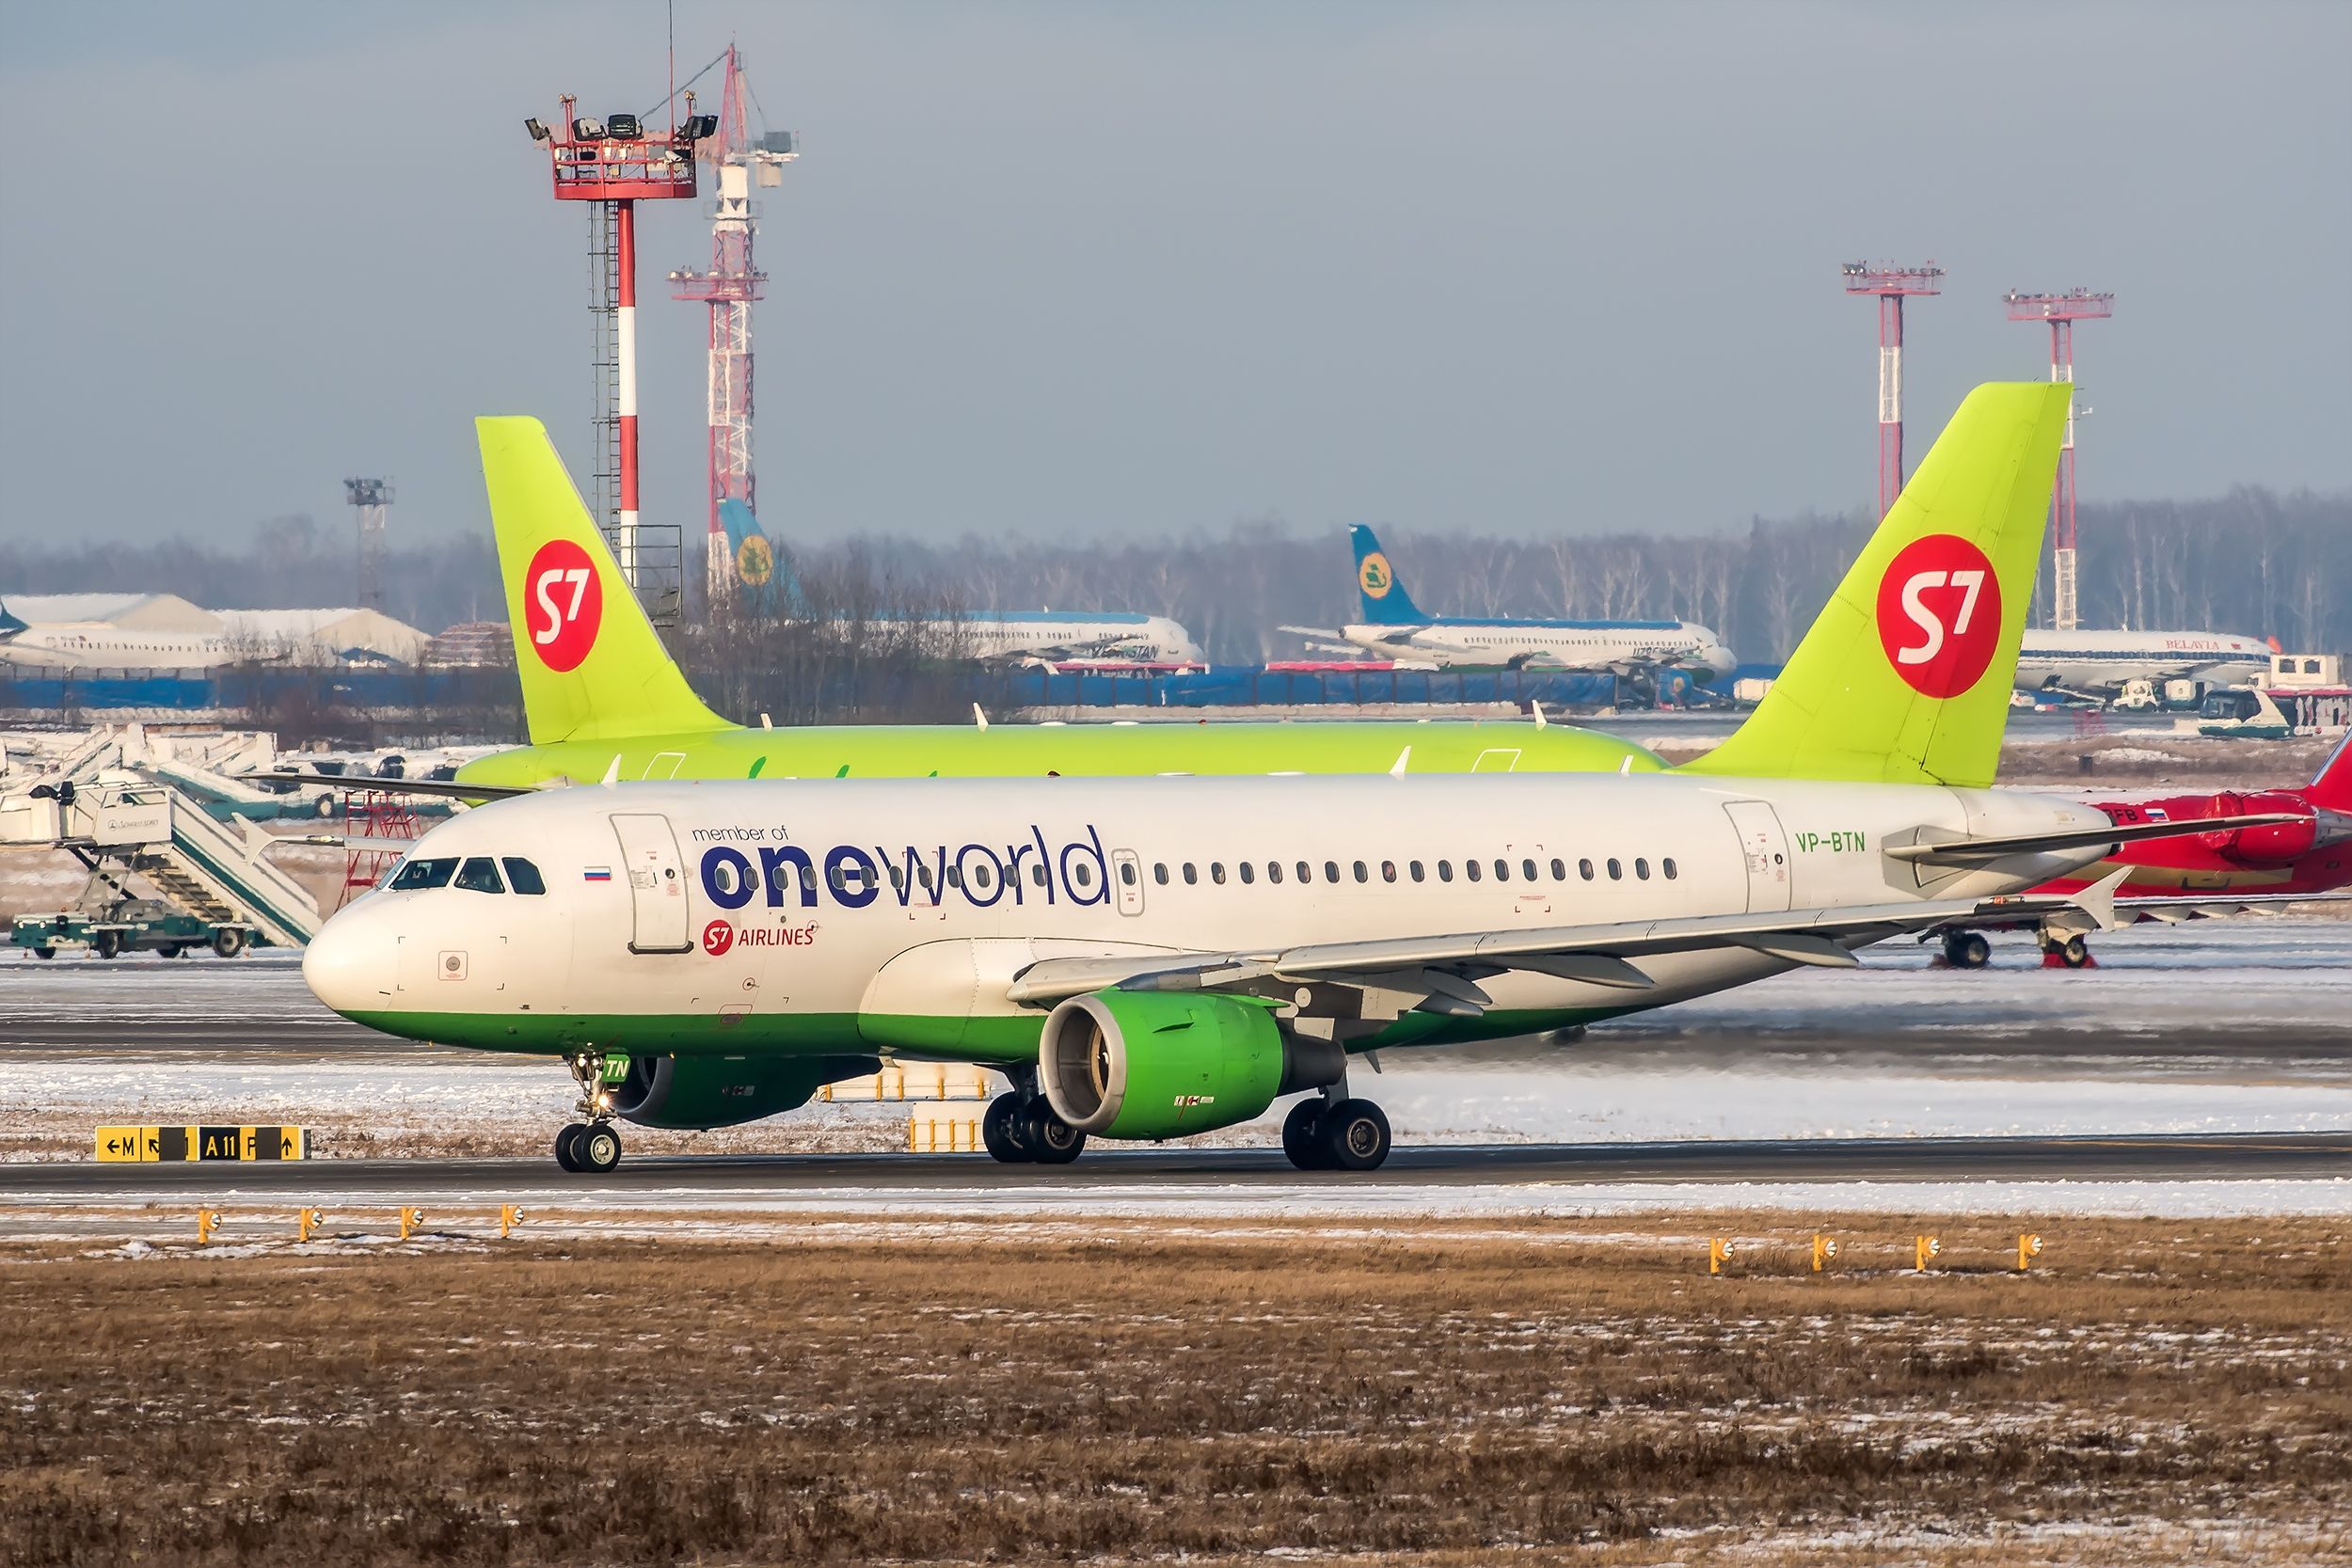 S7 Airbus A319 | VP-BTN in special OneWorld livery taxiing for takeoff at Domodedovo International Airport